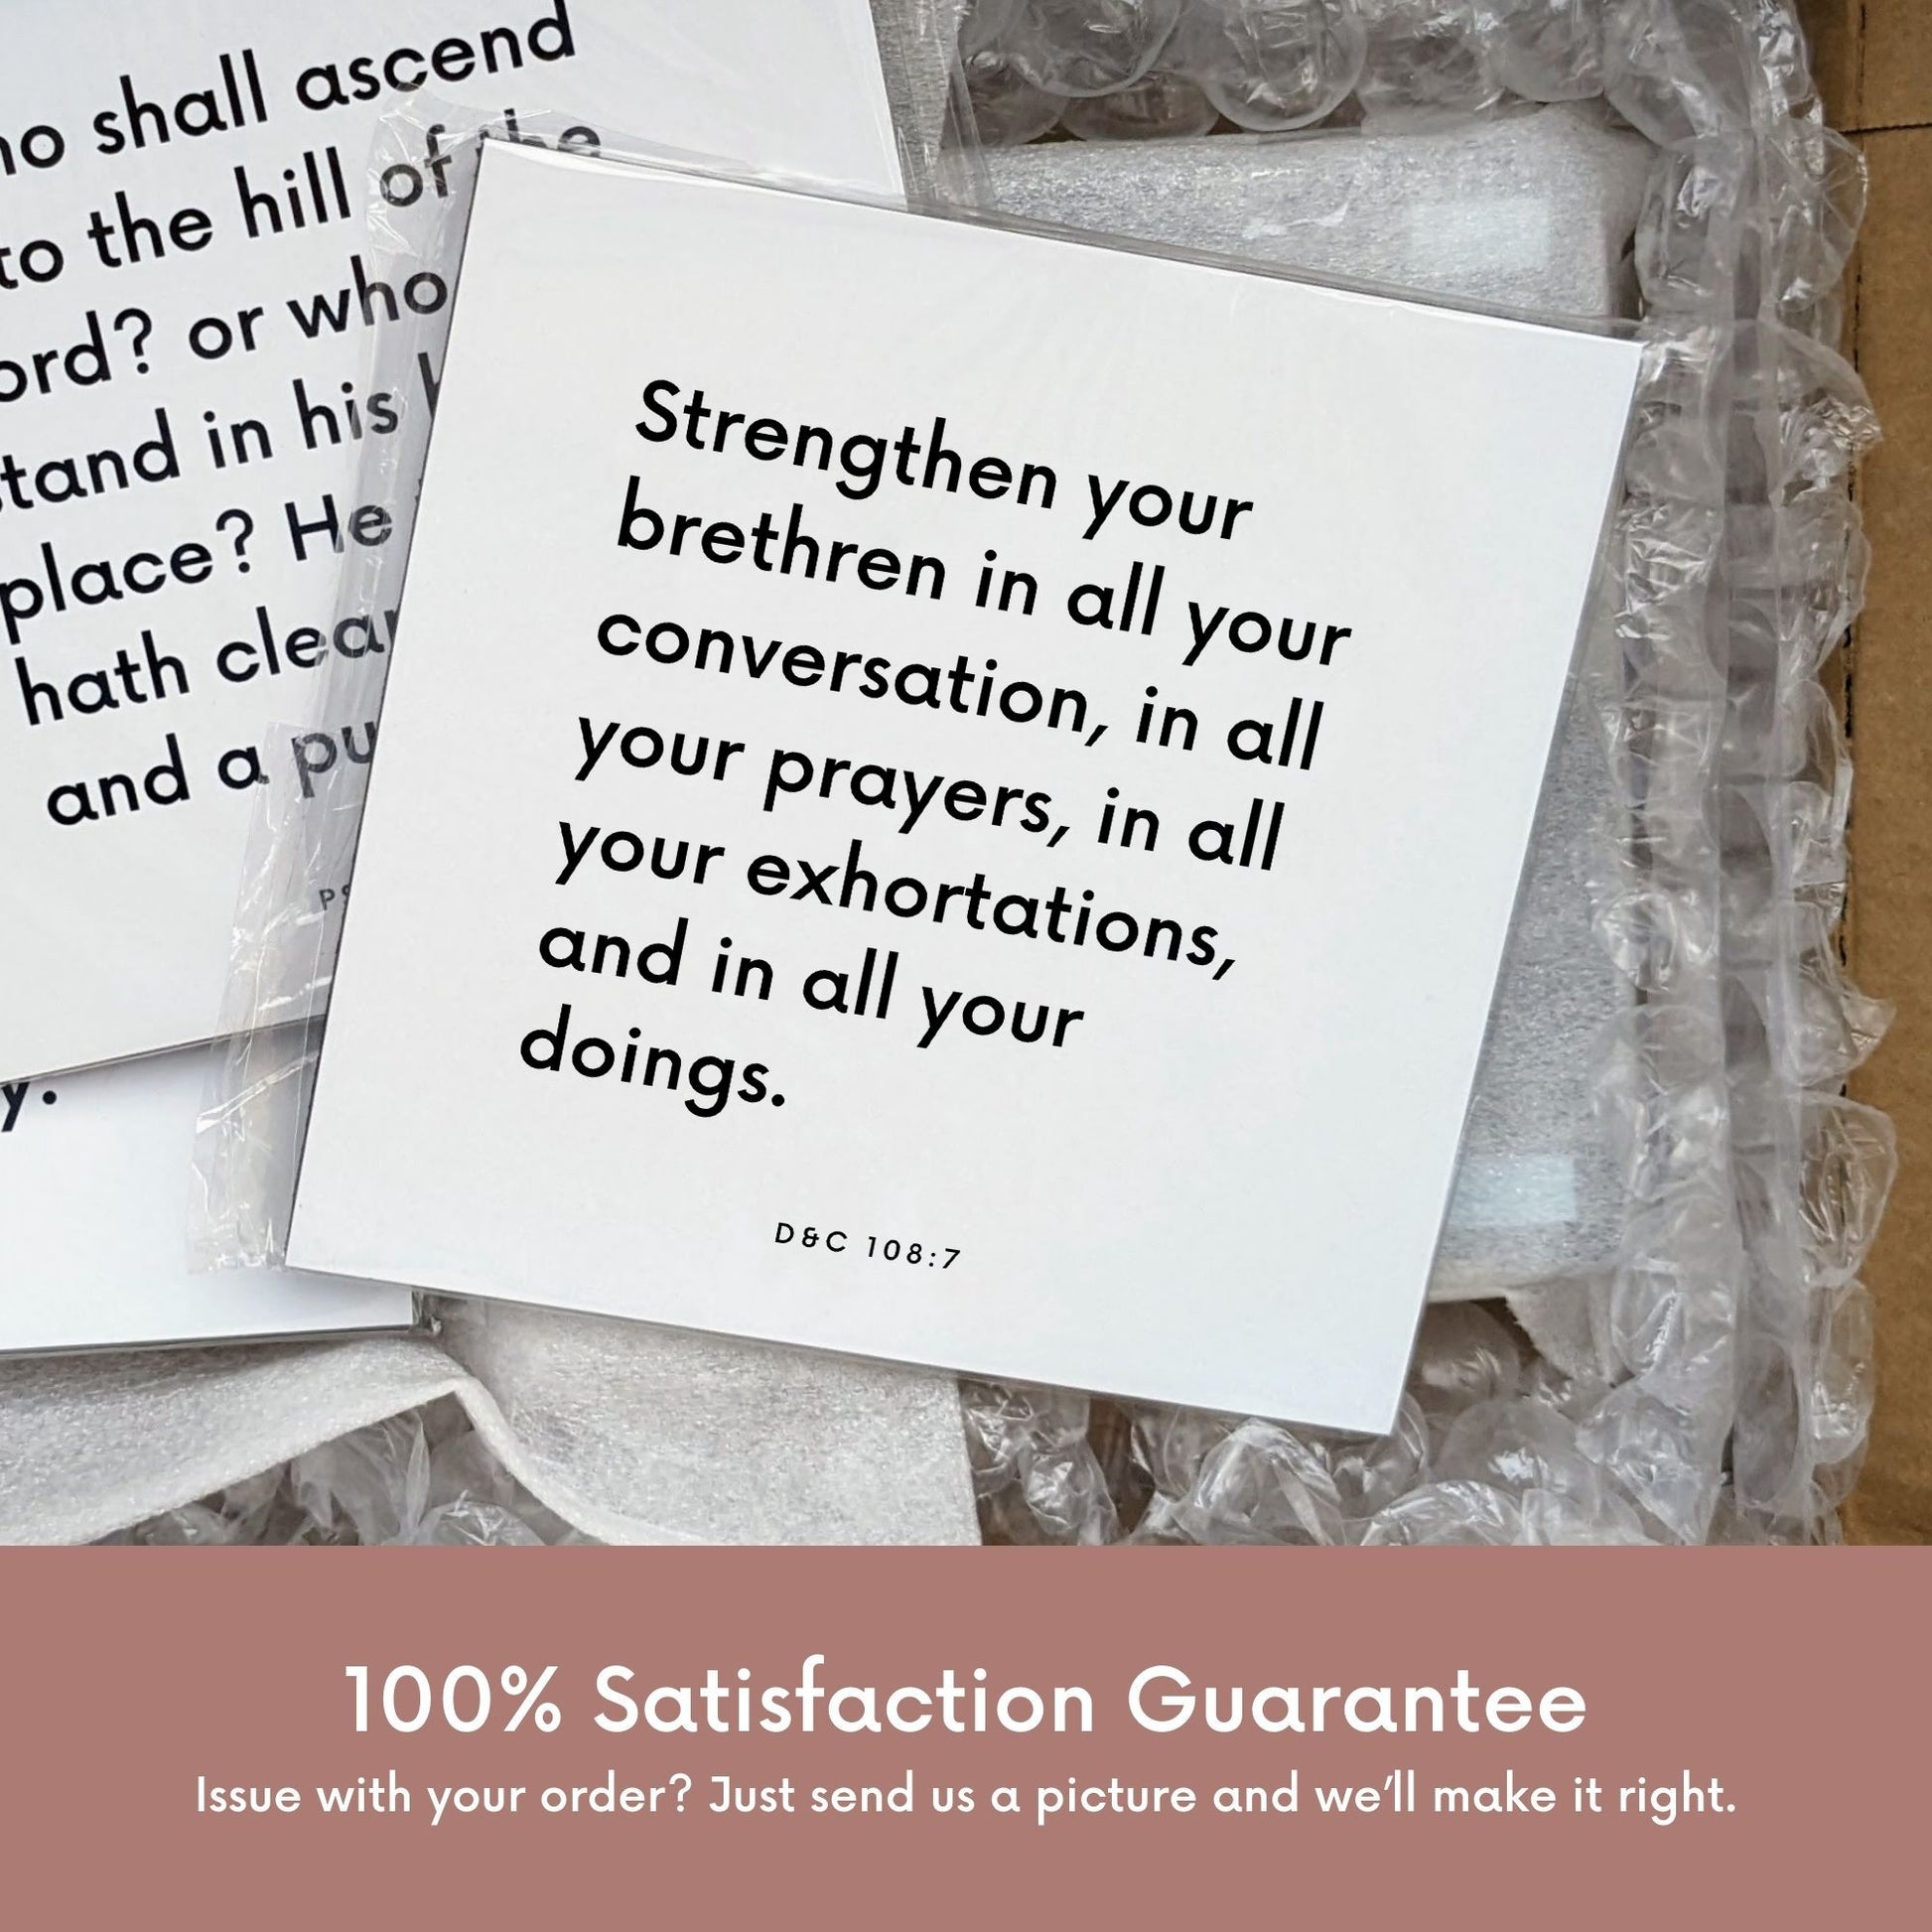 Shipping materials for scripture tile of D&C 108:7 - "Strengthen your brethren in all your conversation"